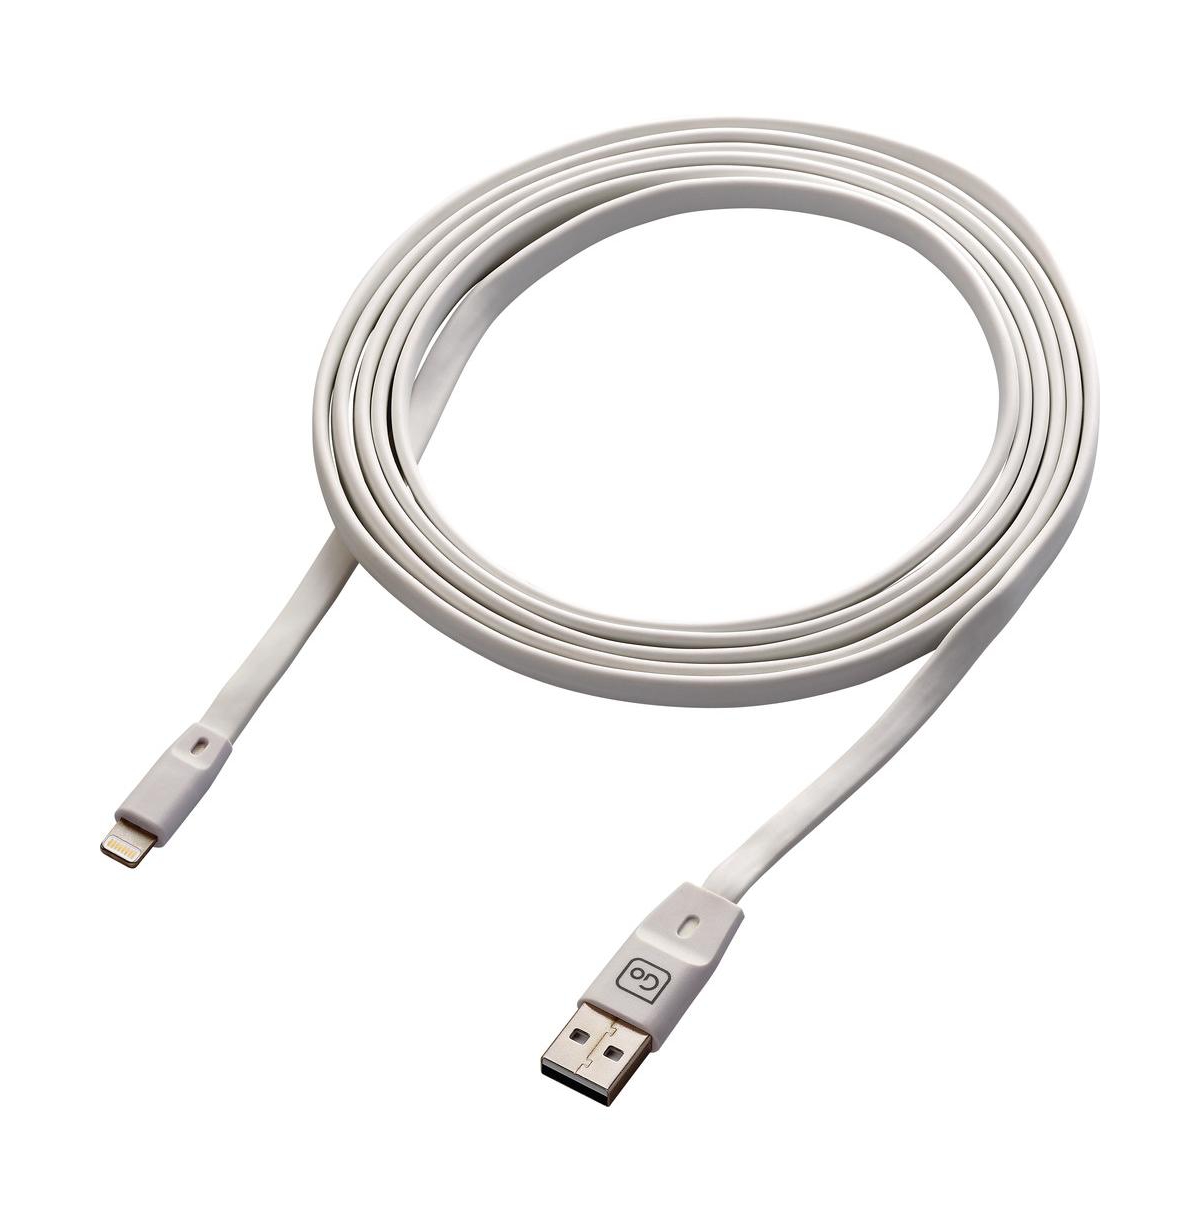 2M Usb Cable - White